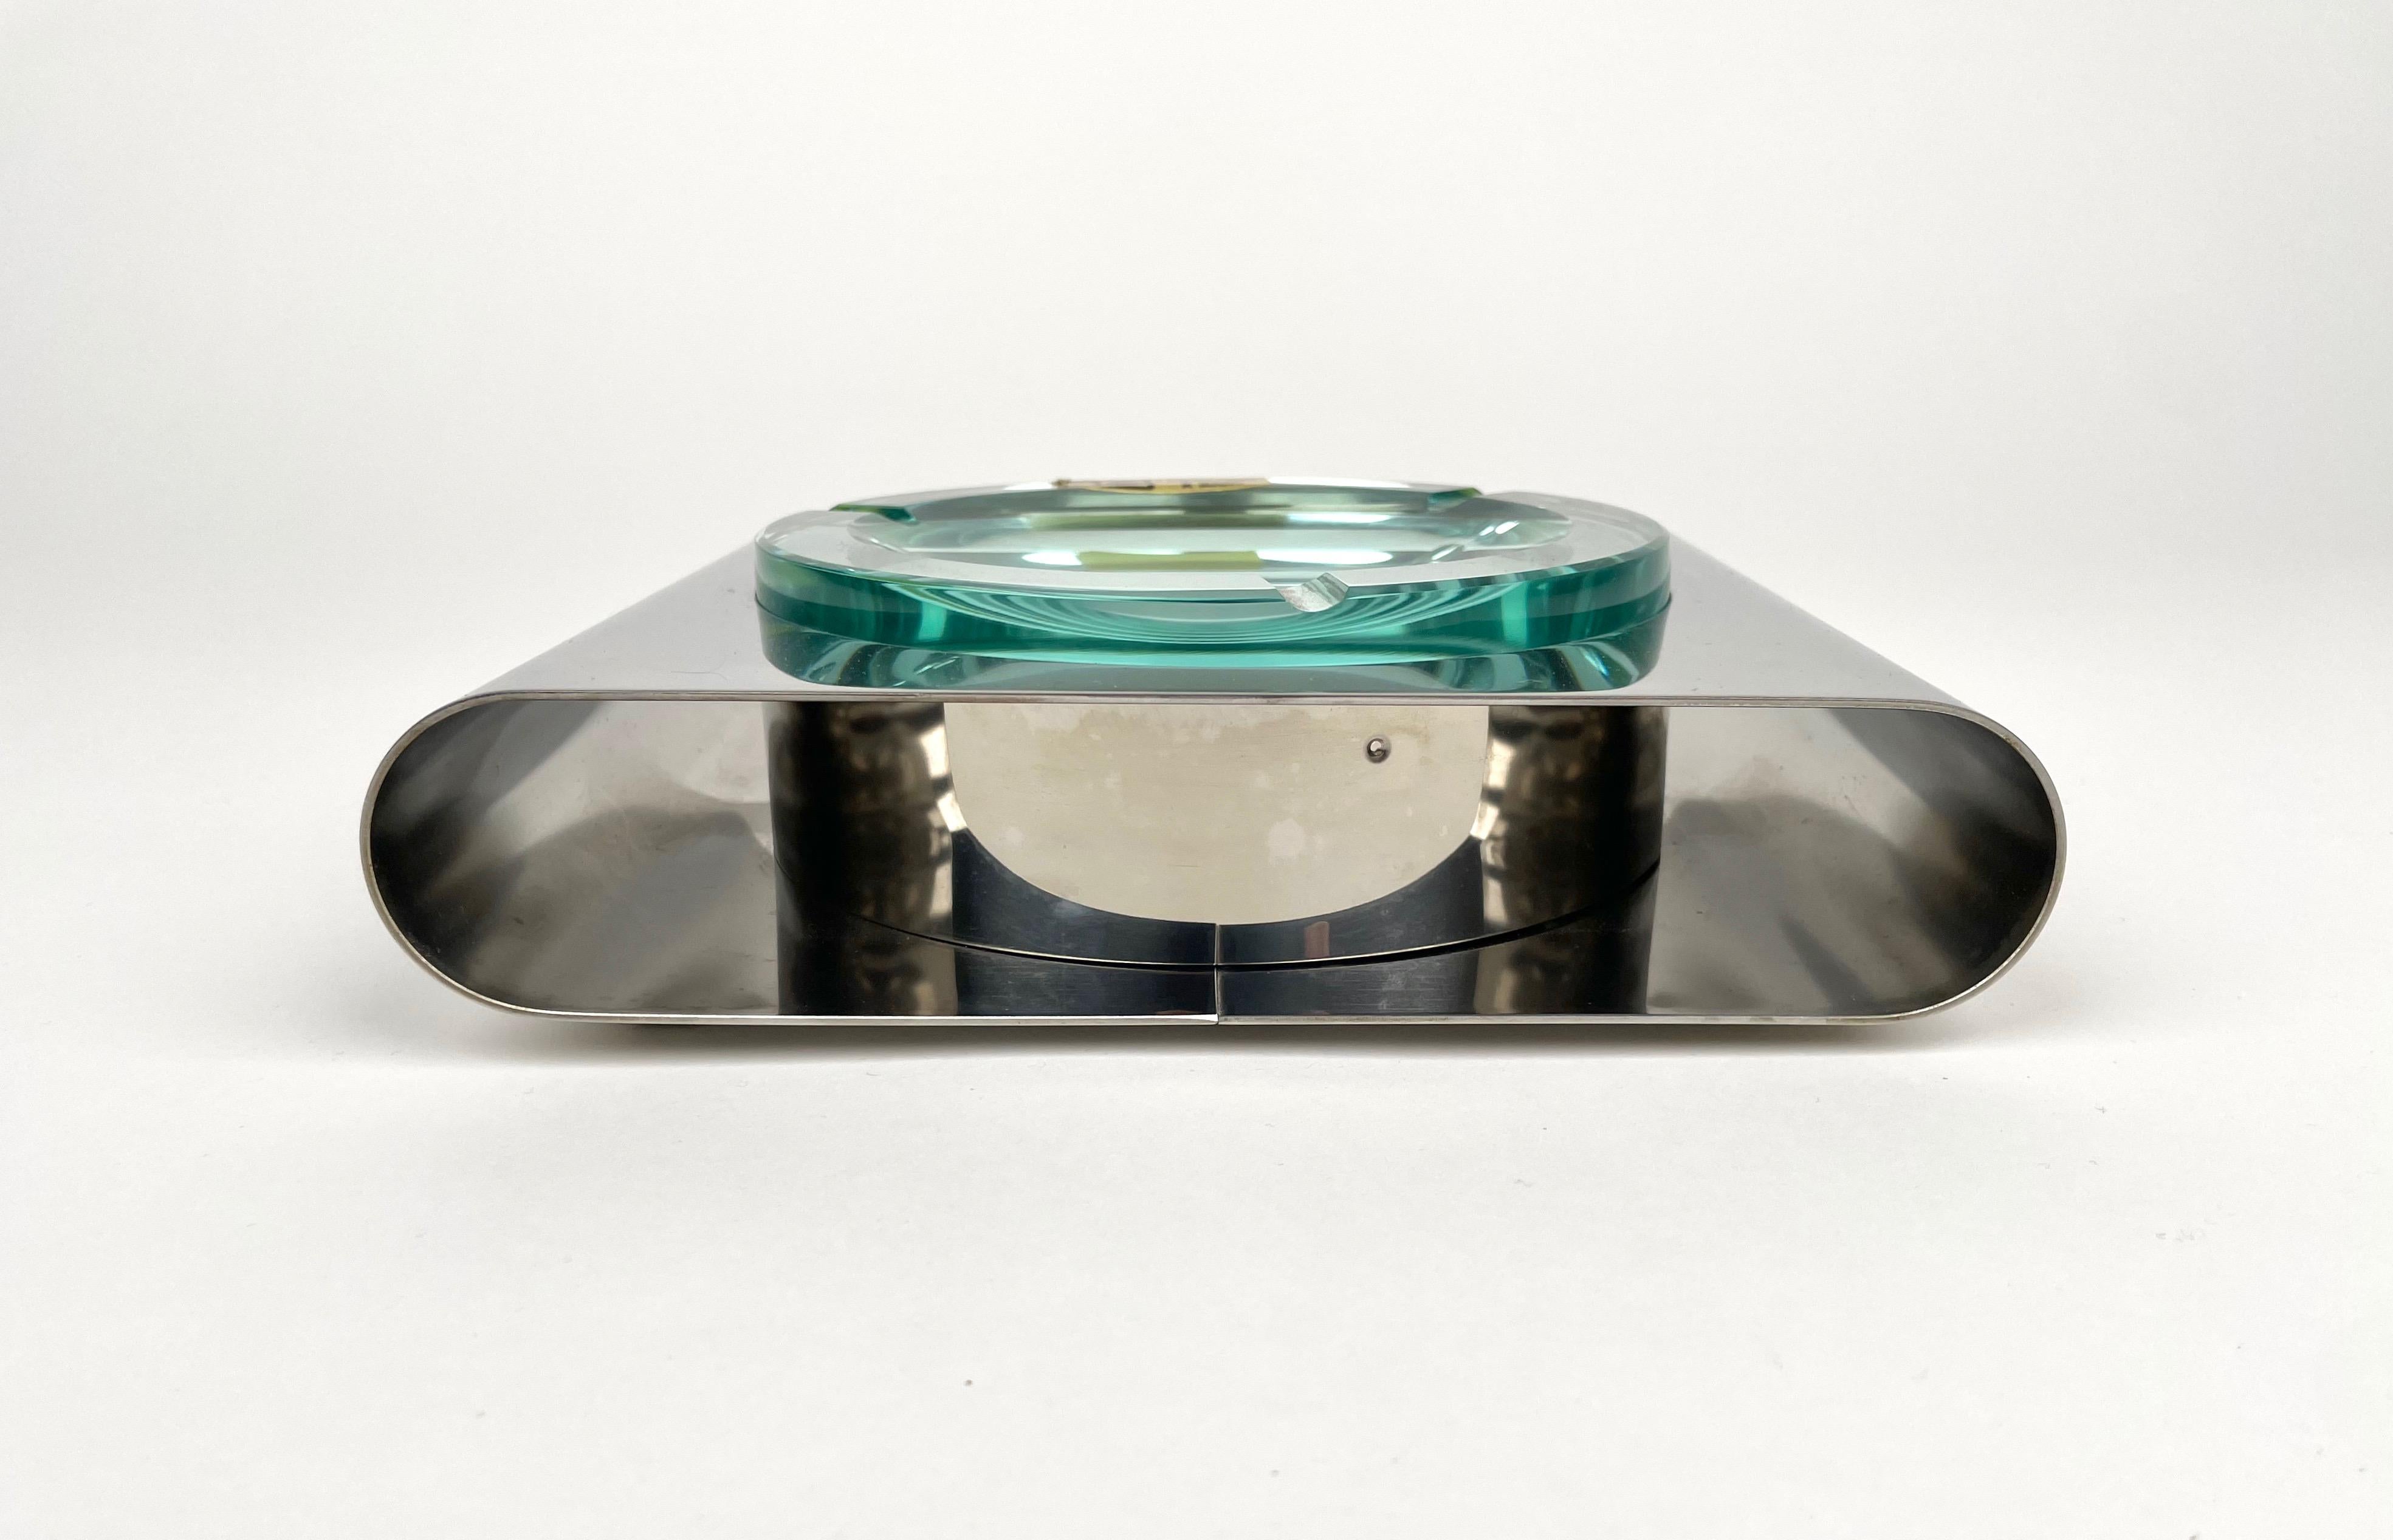 Ashtray Sena Cristal Steel and Green Glass, Italy, 1970s For Sale 3